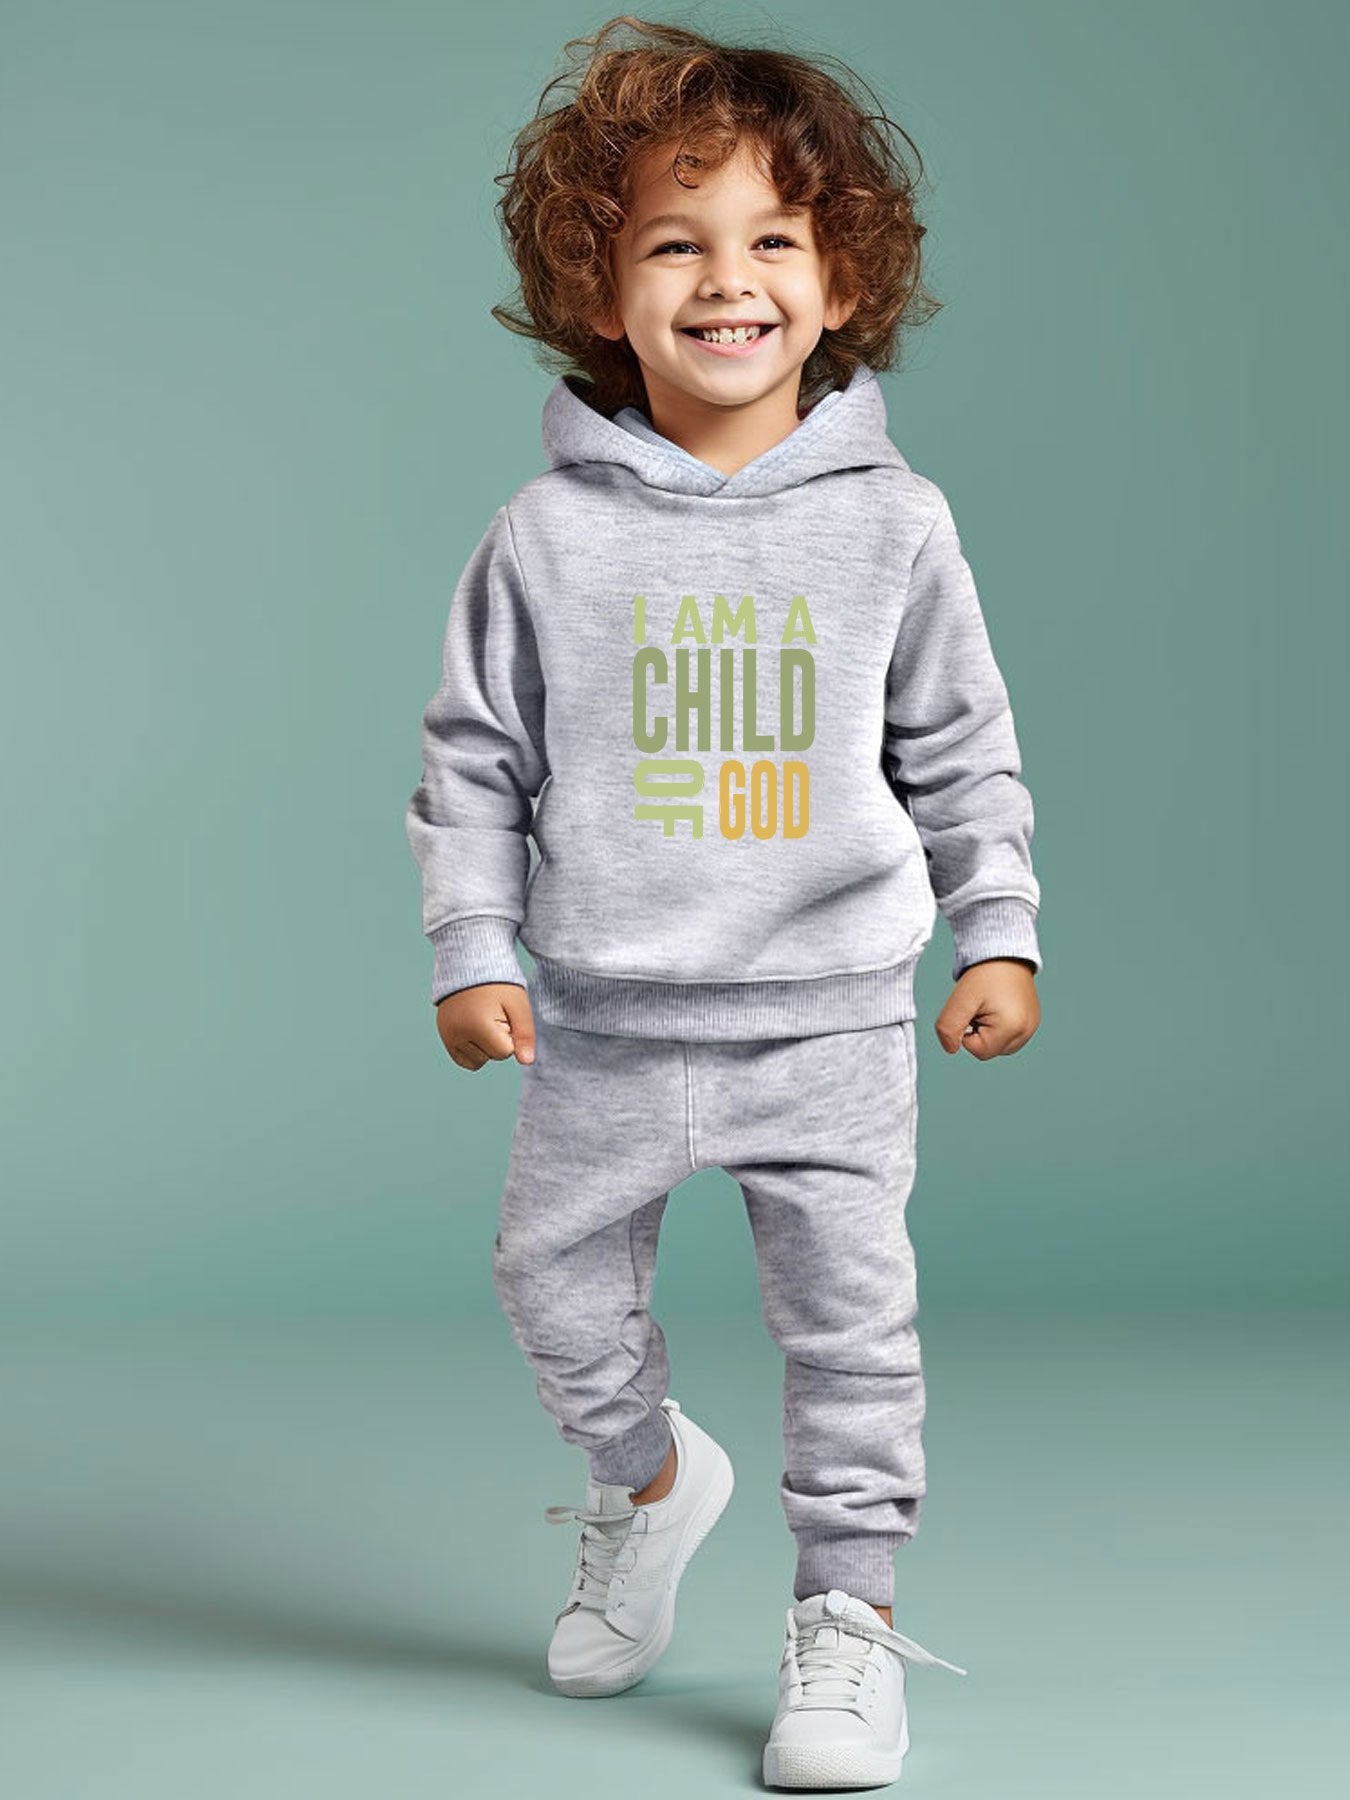 I AM A CHILD OF GOD Youth Christian Casual (hooded) Outfit claimedbygoddesigns